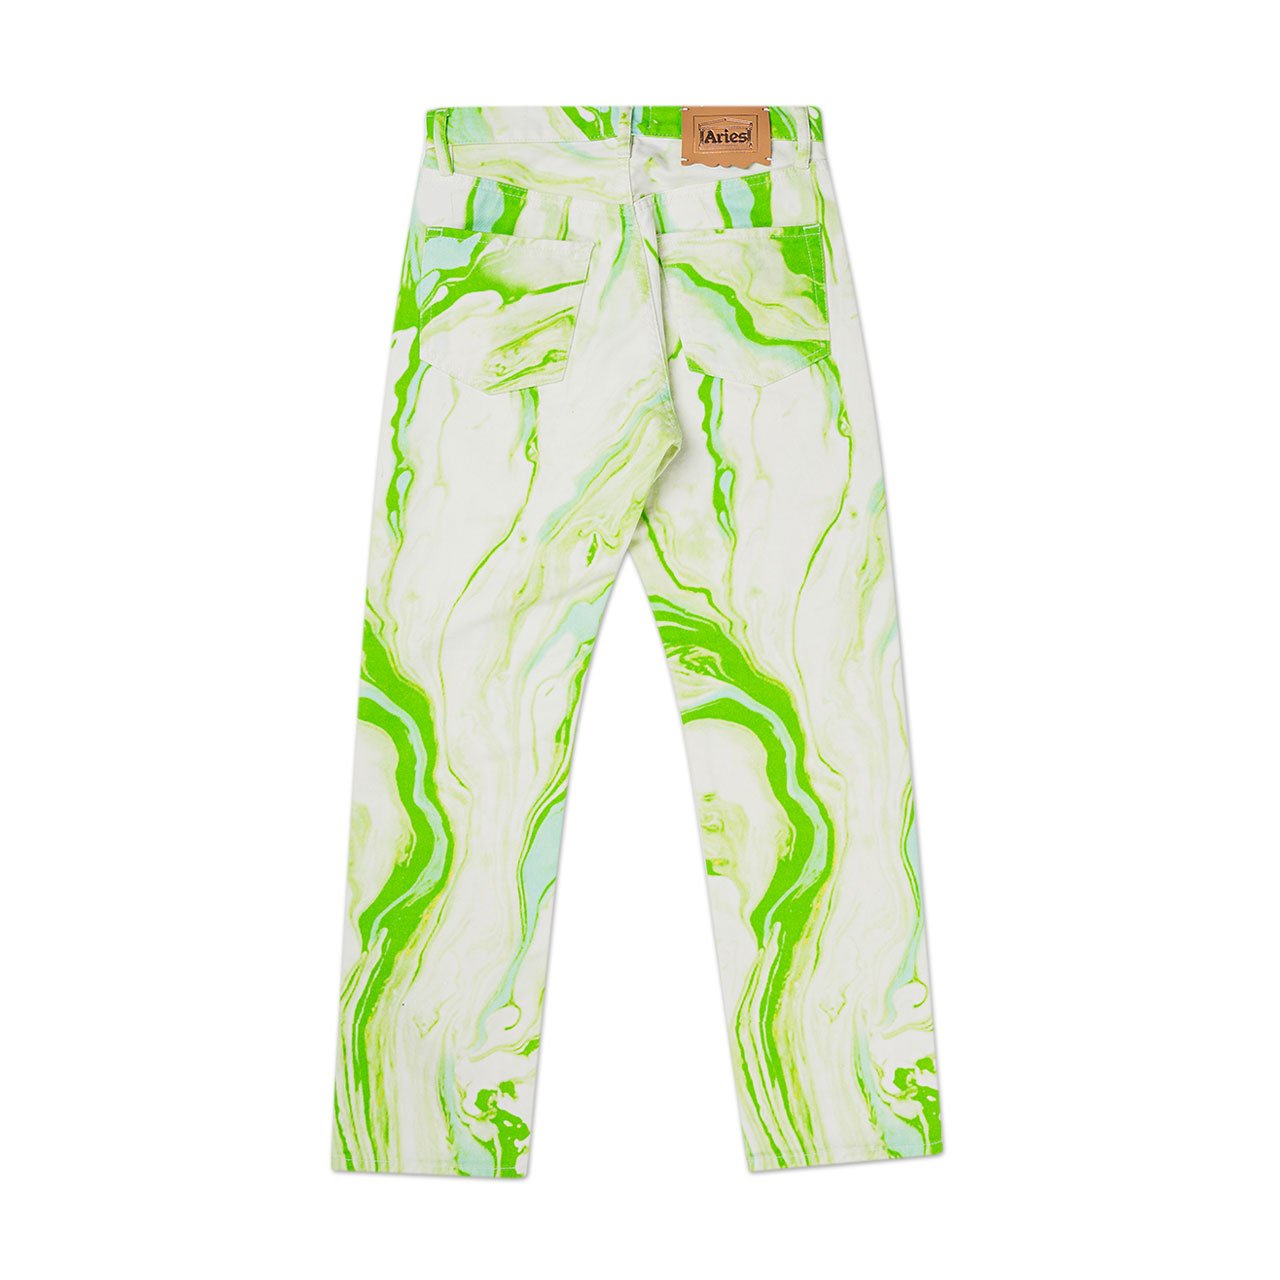 aries marble lilly jeans (white / green) - frar30501-30 - a.plus - Image - 2